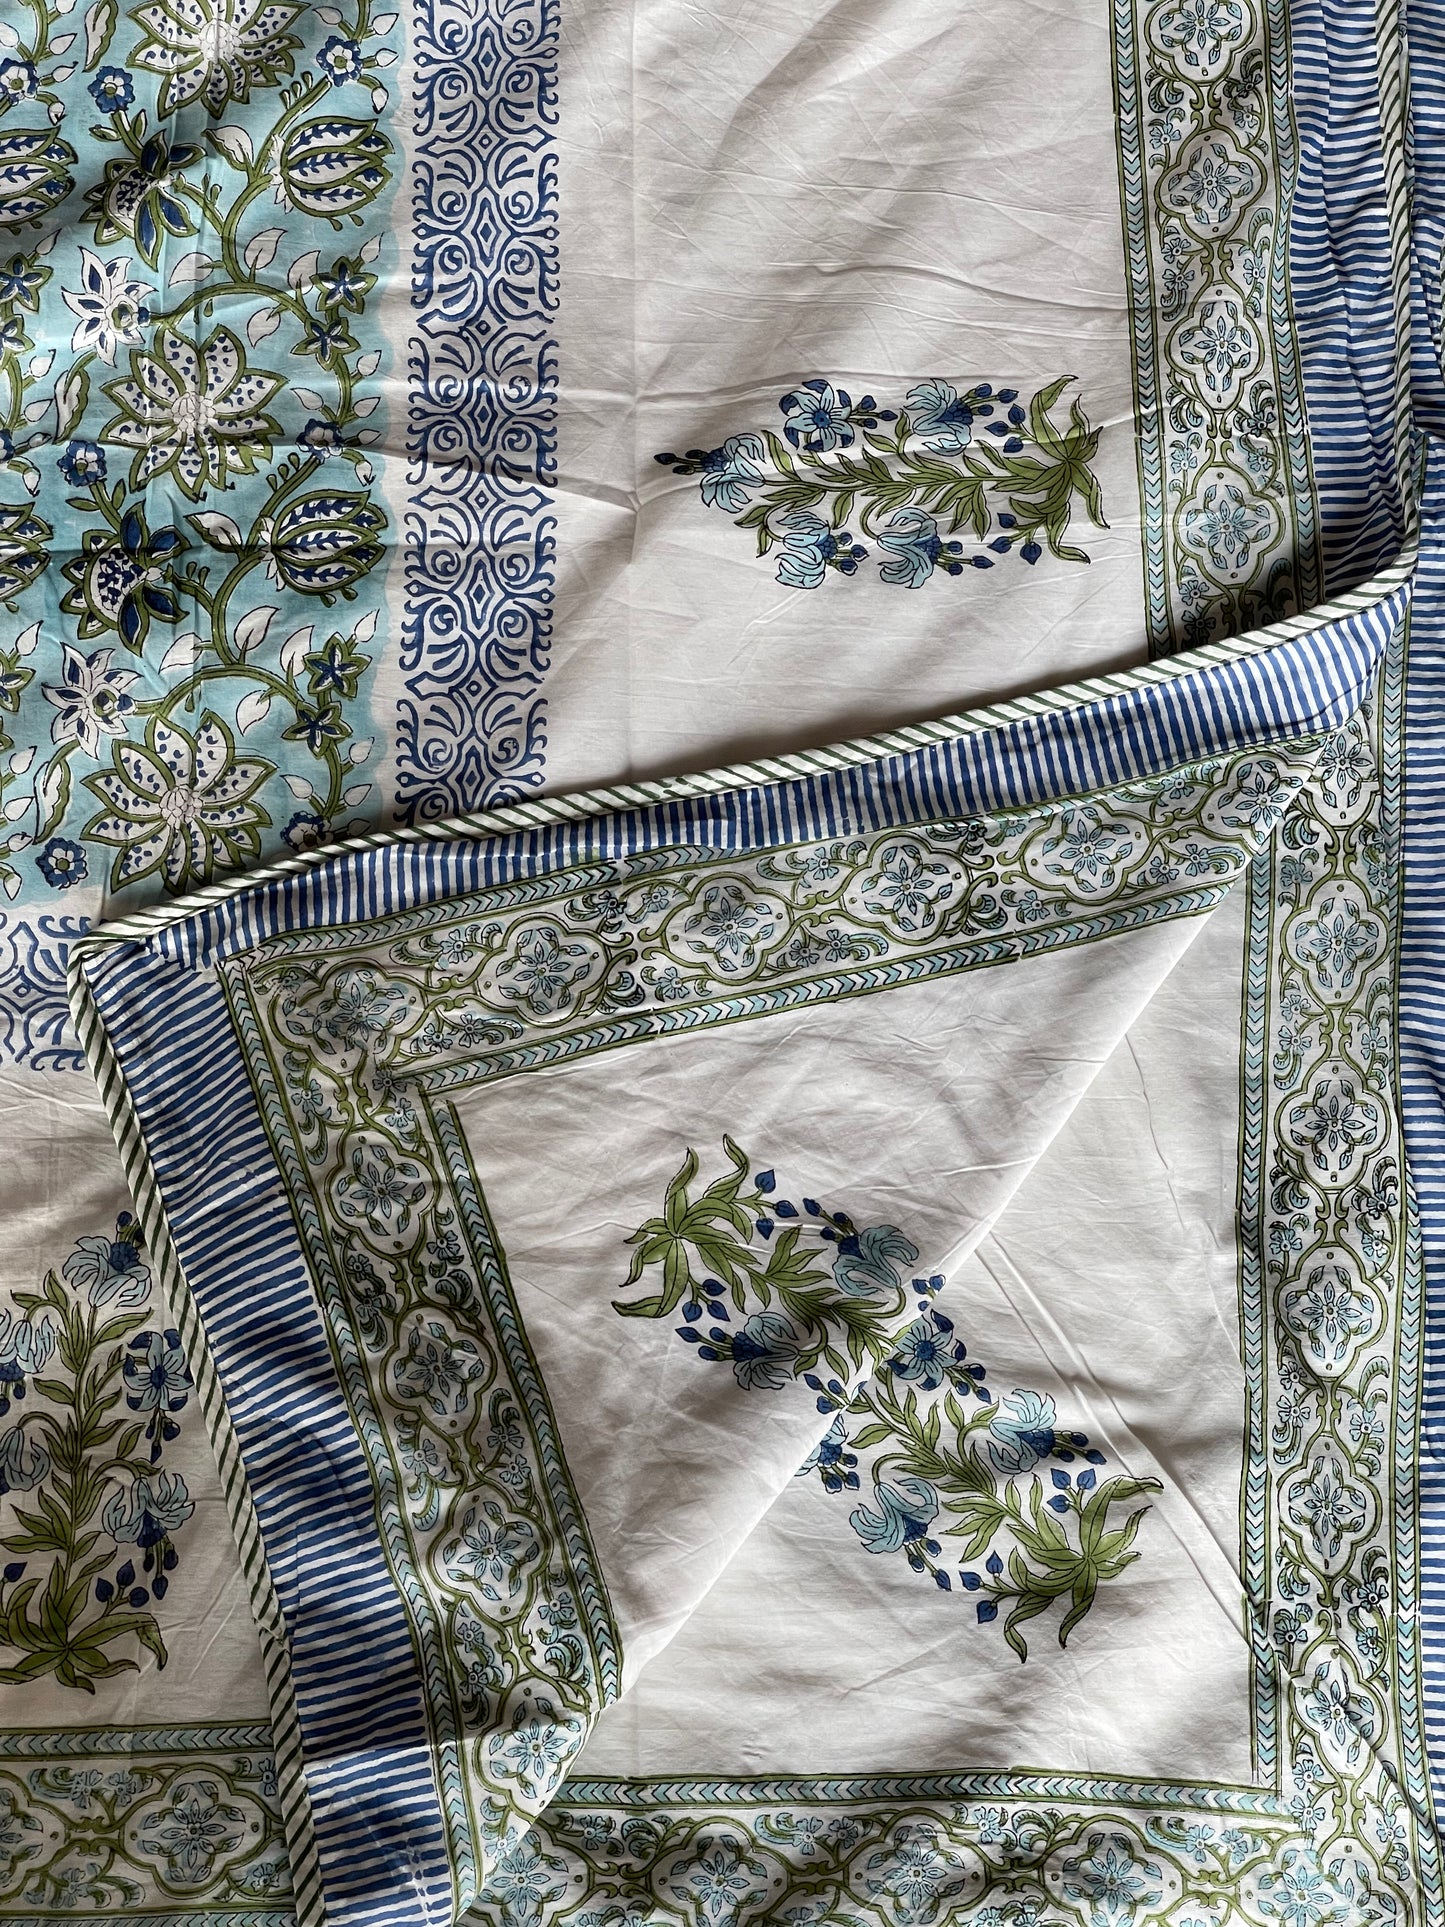 Blue center with white border hand block printed king size reversible comforter